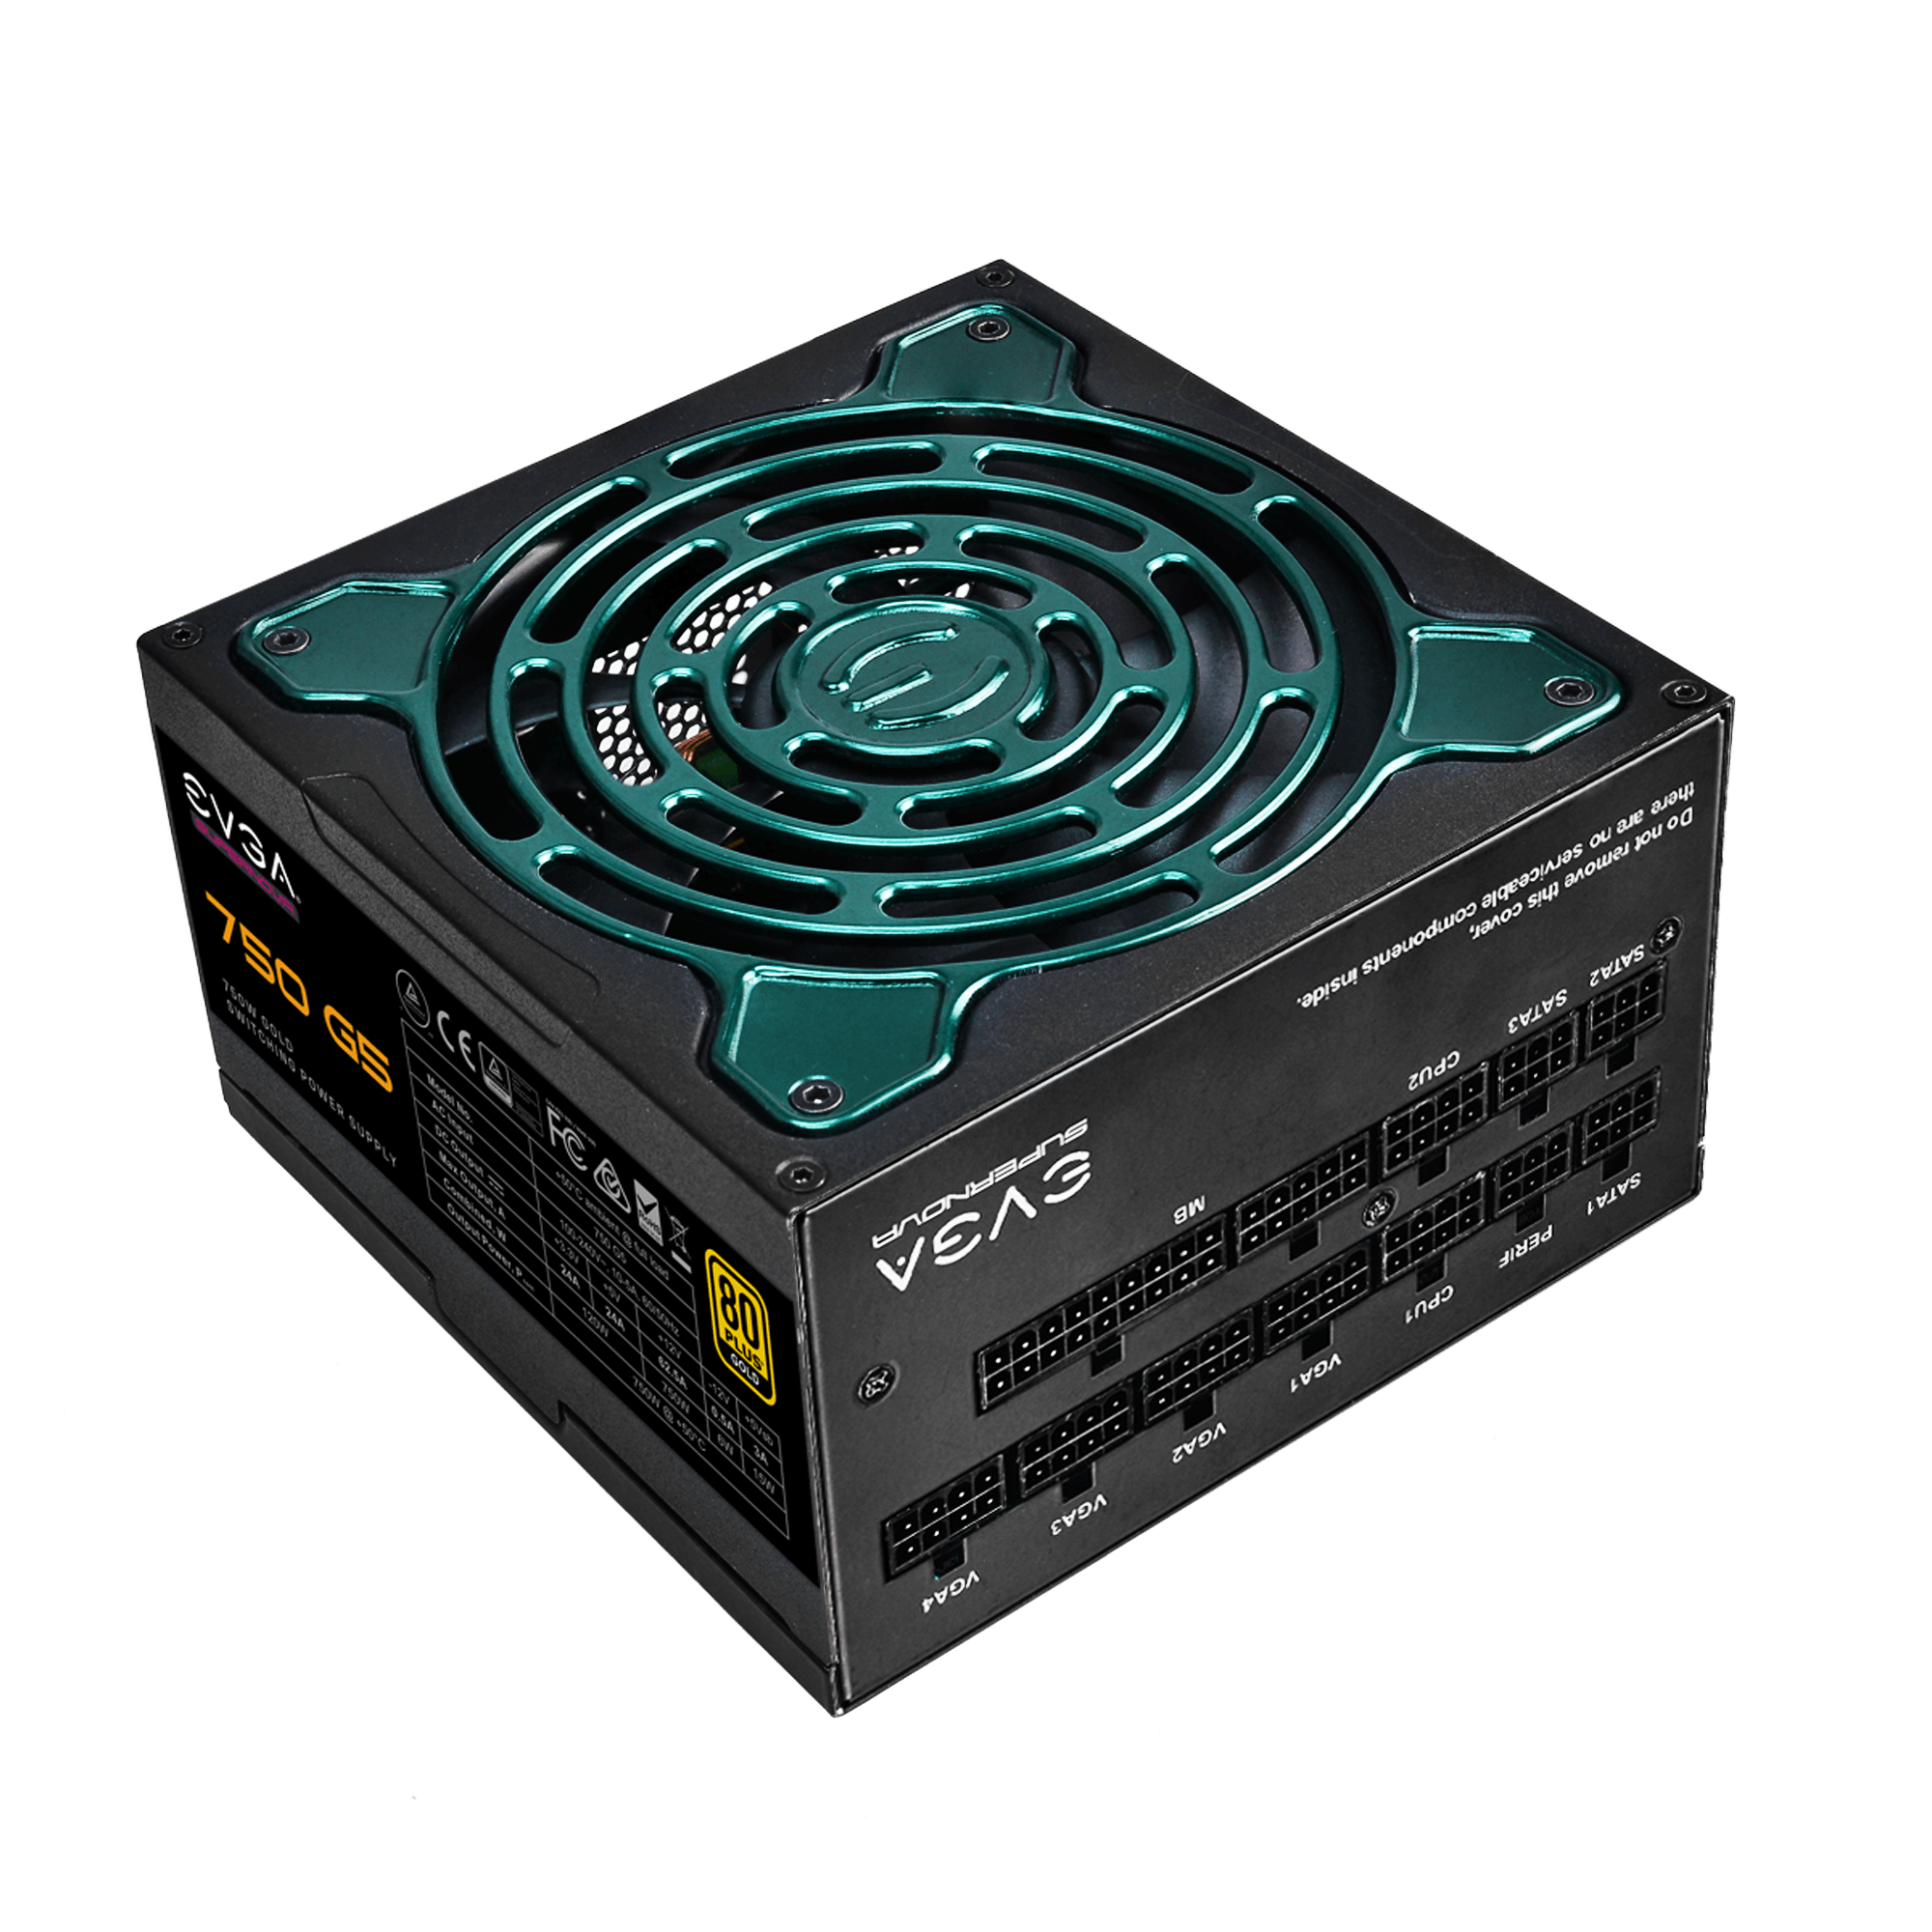 EVGA - Products - EVGA SuperNOVA 750 G5, 80 Plus Gold 750W, Fully Modular,  Eco Mode with FDB Fan, 10 Year Warranty, Includes Power ON Self Tester,  Compact 150mm Size, Power Supply 220-G5-0750-X1 - 220-G5-0750-X1